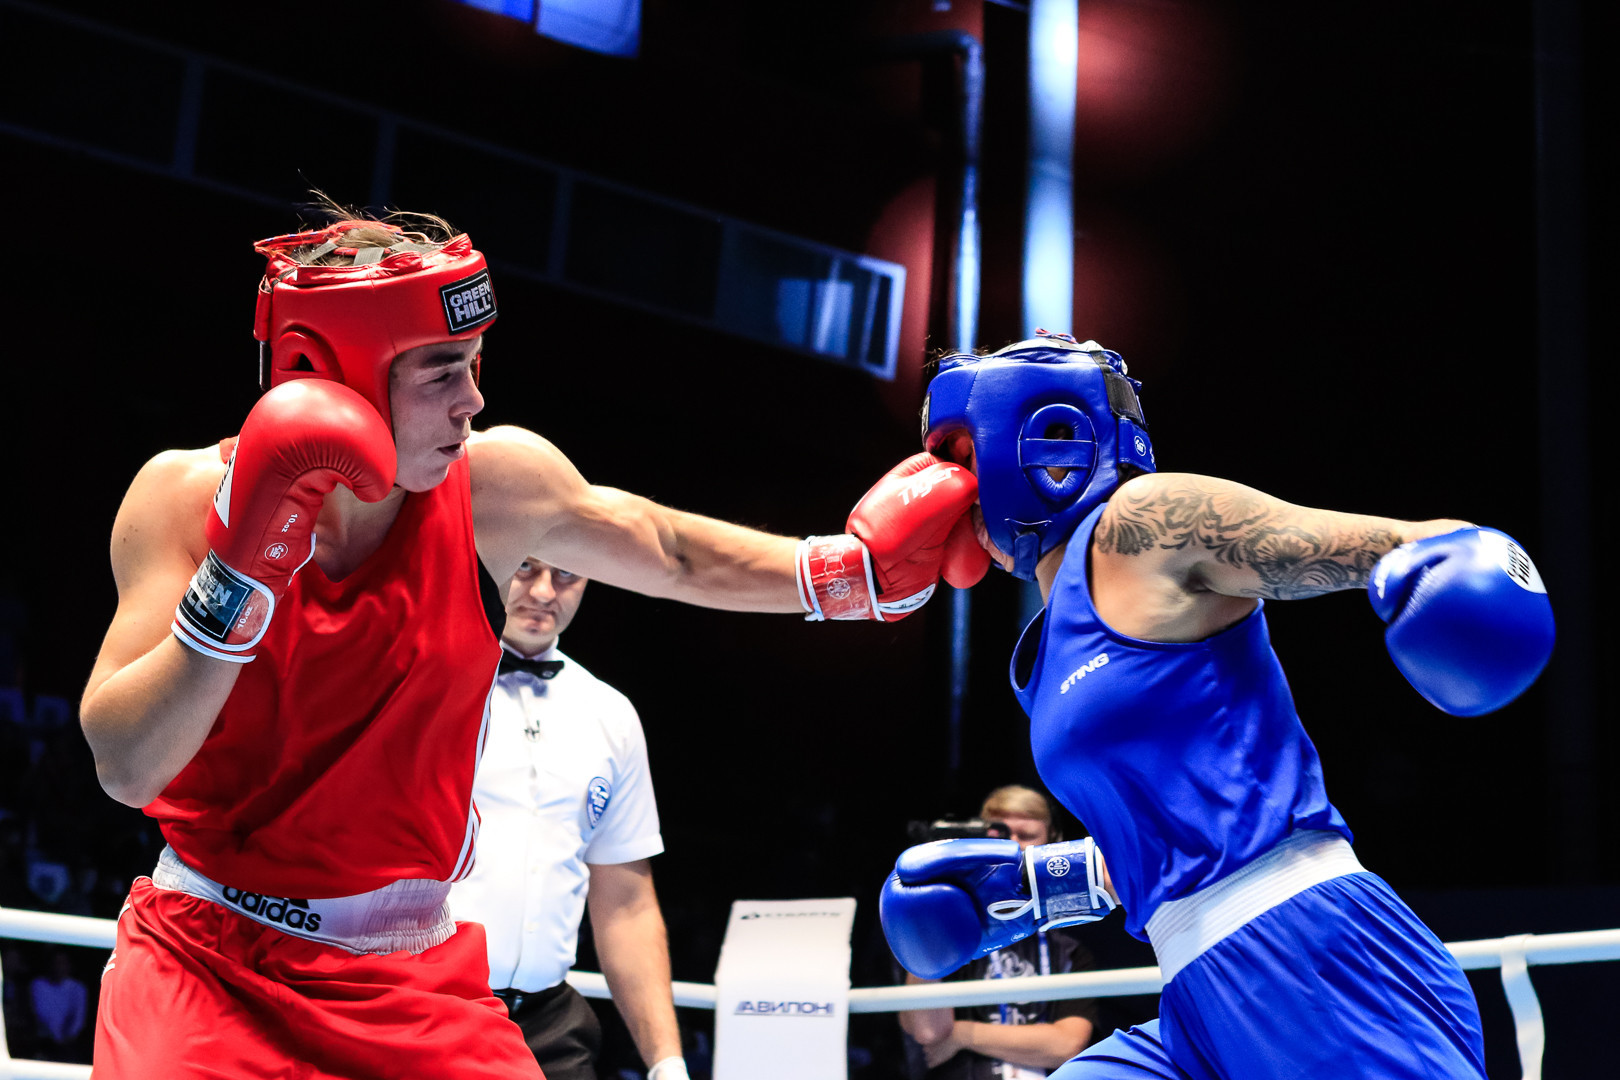 In the middleweight division, Rio 2016 Olympic silver medallist Nouchka Fontijn overcame Tammara Thibeault of Canada 4-1 ©AIBA